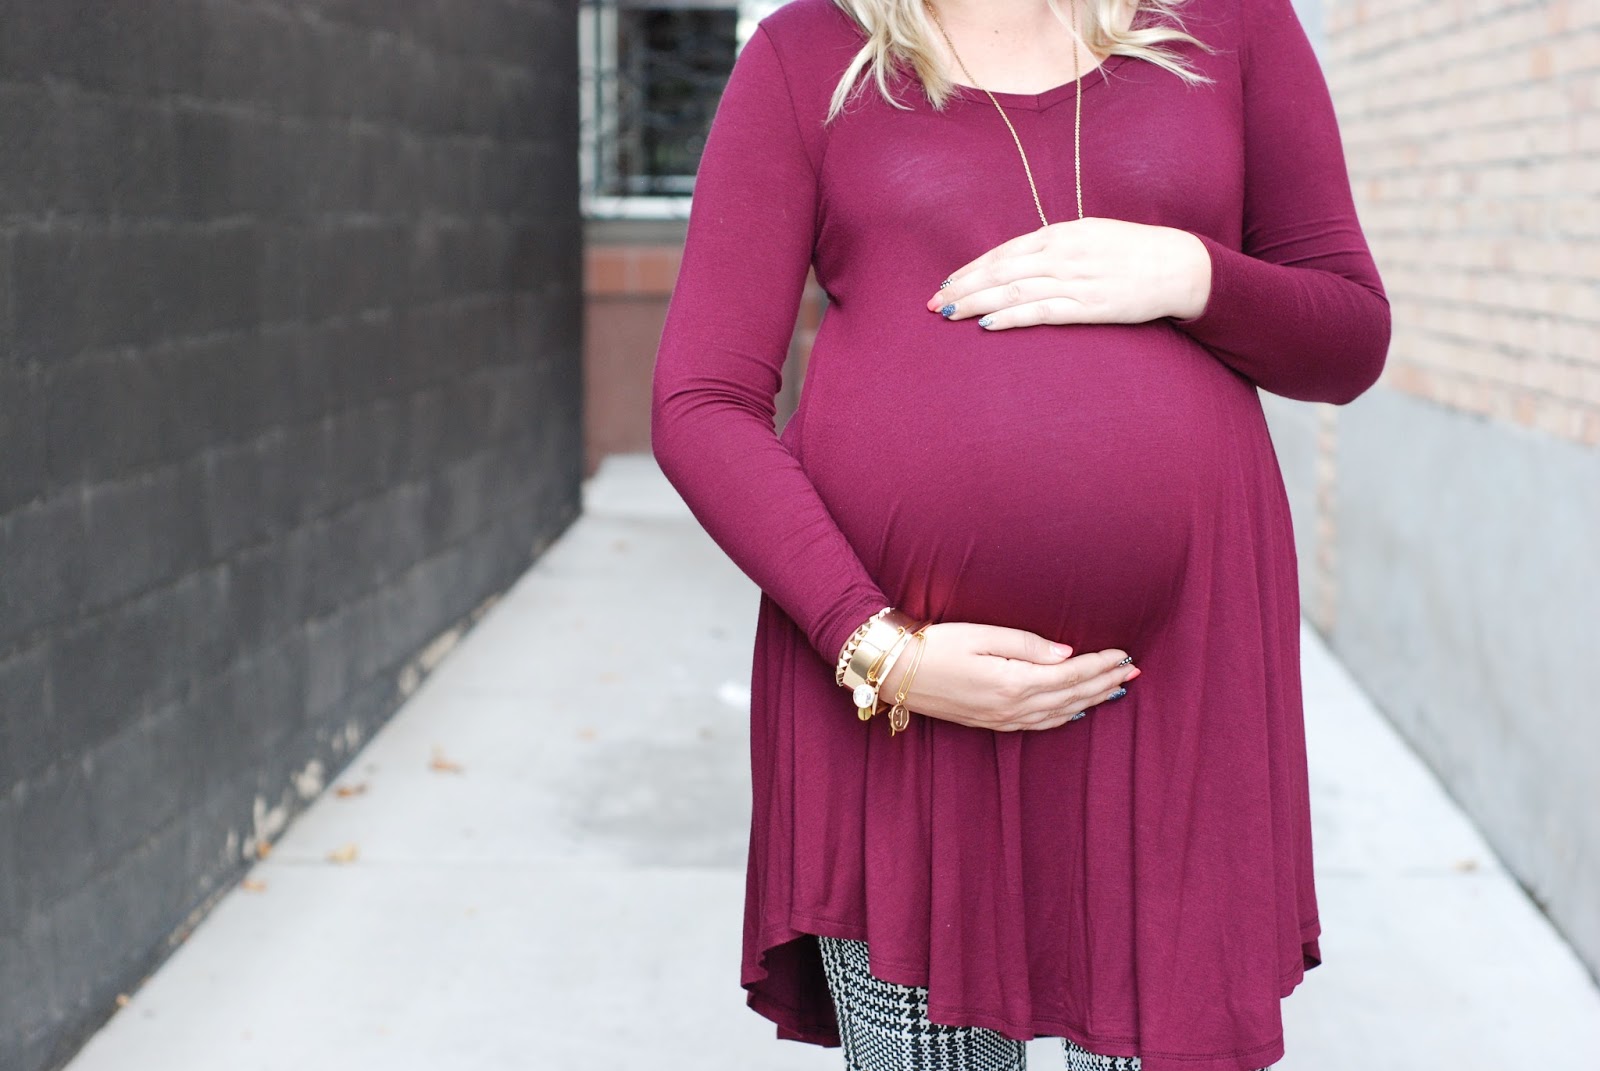 Baby Bump, Maternity Outfit, Pregnant Outfit